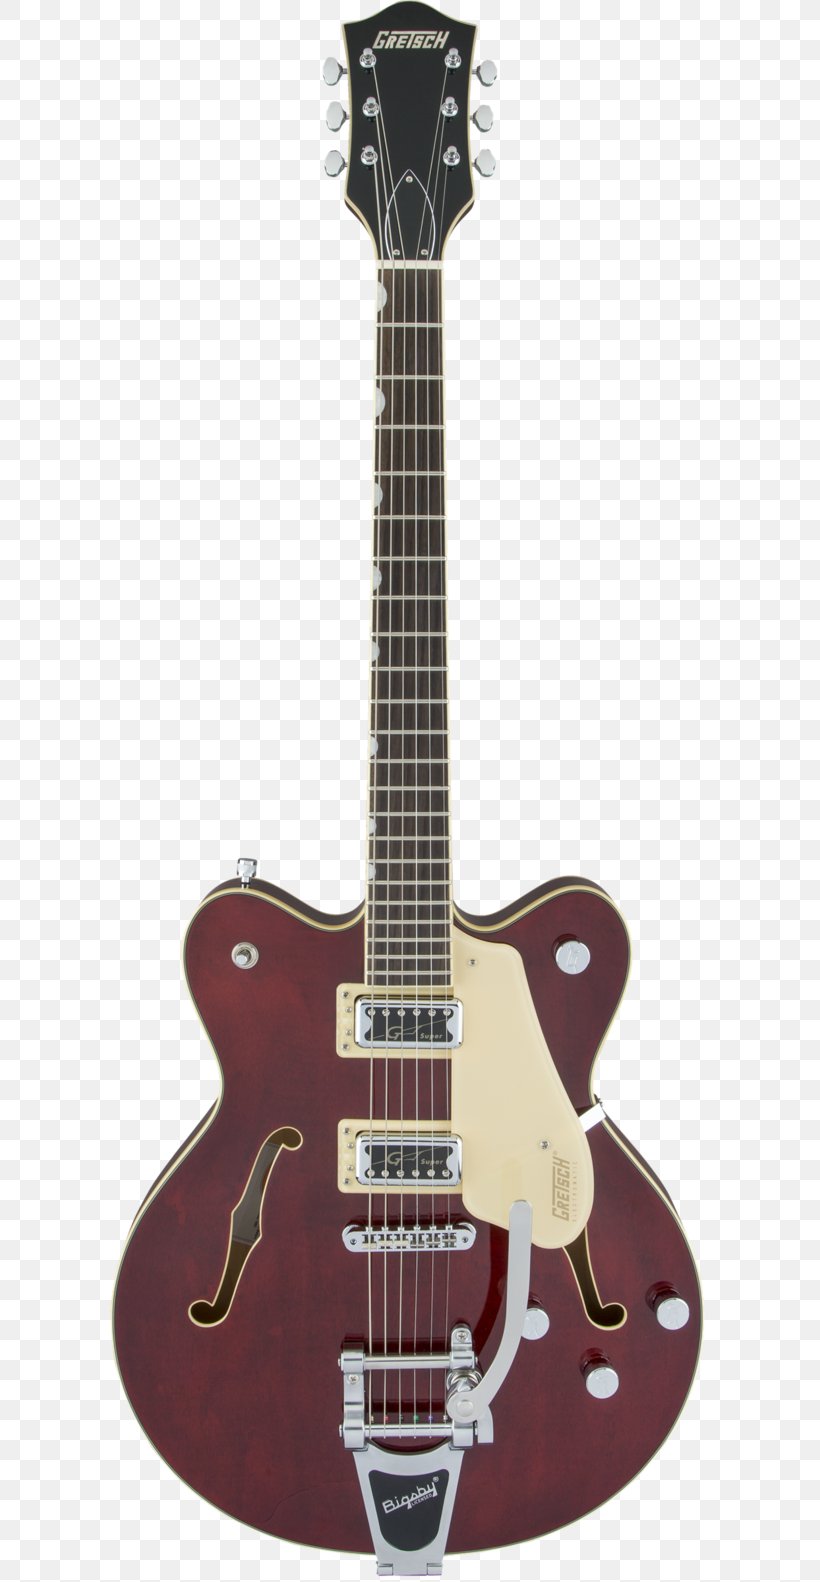 Cutaway Gretsch G5622T-CB Electromatic Electric Guitar Bigsby Vibrato Tailpiece Semi-acoustic Guitar, PNG, 600x1582px, Cutaway, Acoustic Electric Guitar, Acoustic Guitar, Archtop Guitar, Bass Guitar Download Free